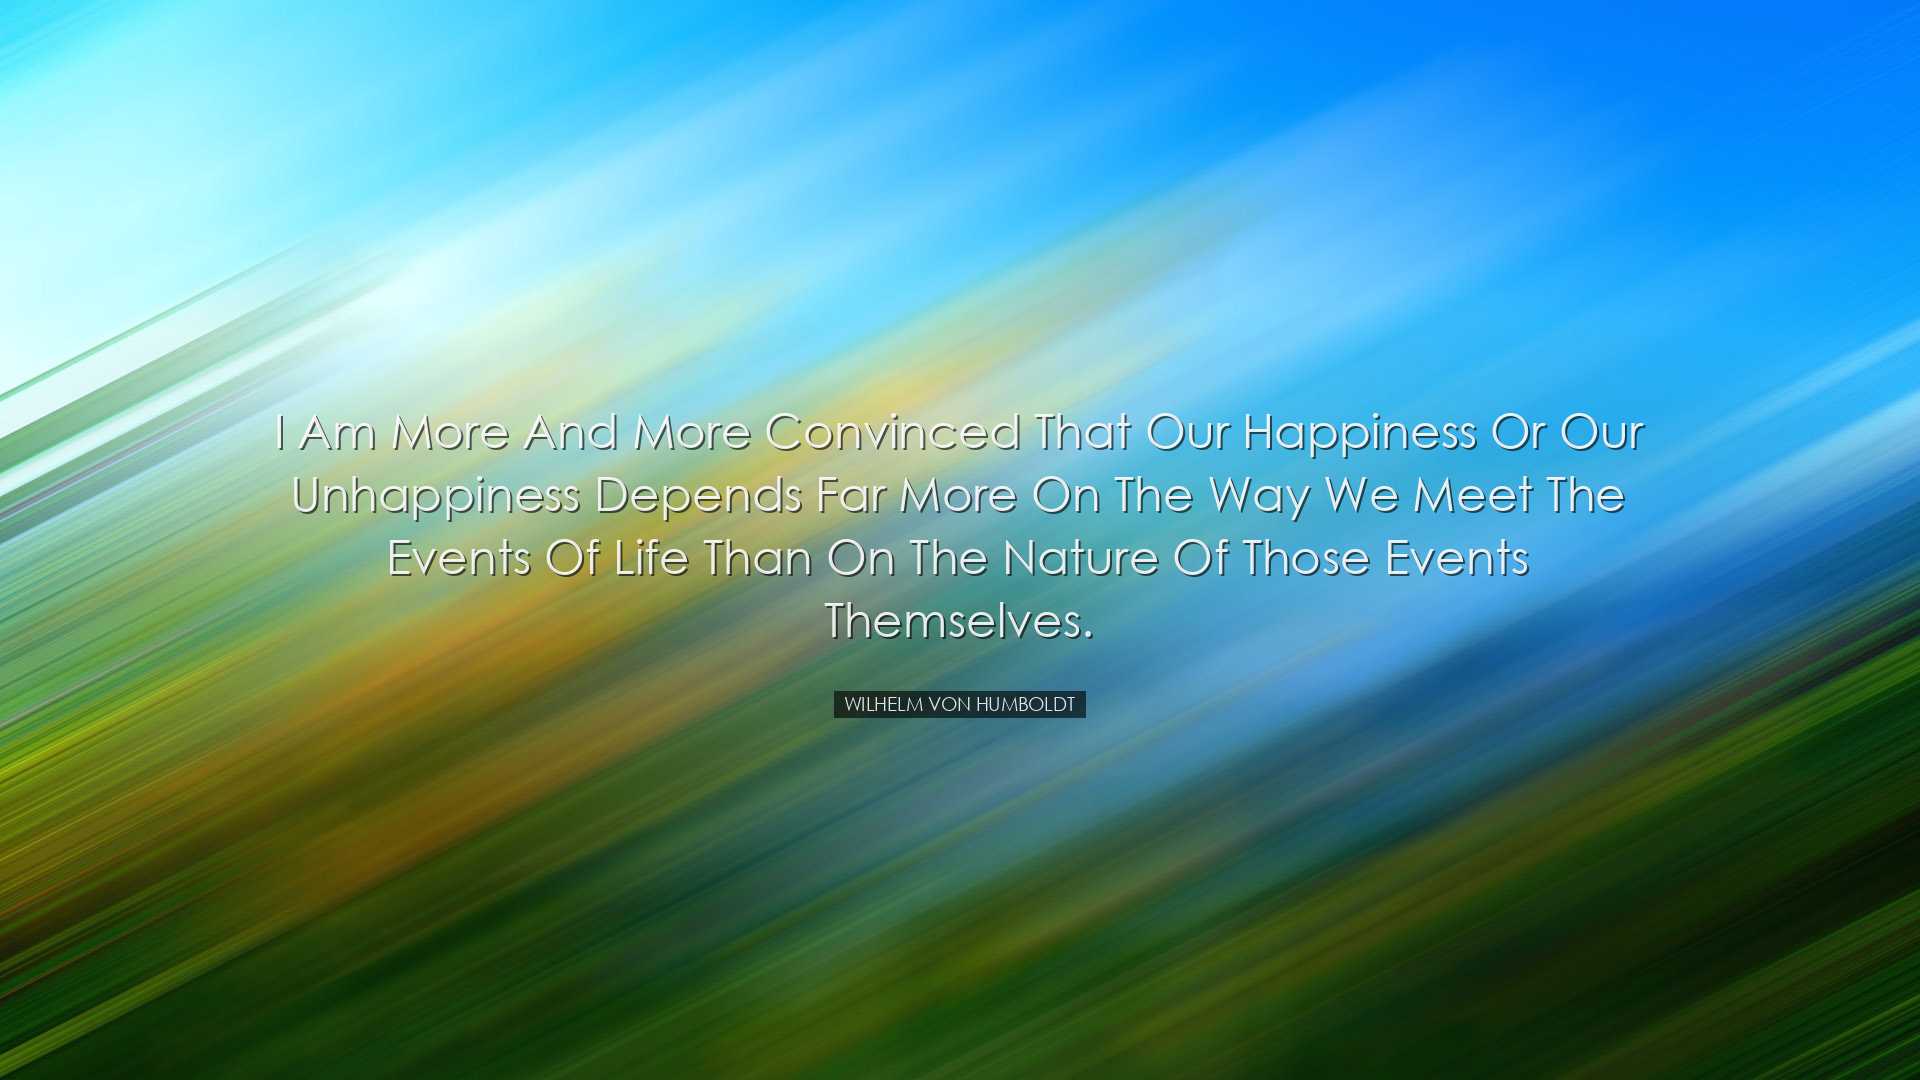 I am more and more convinced that our happiness or our unhappiness